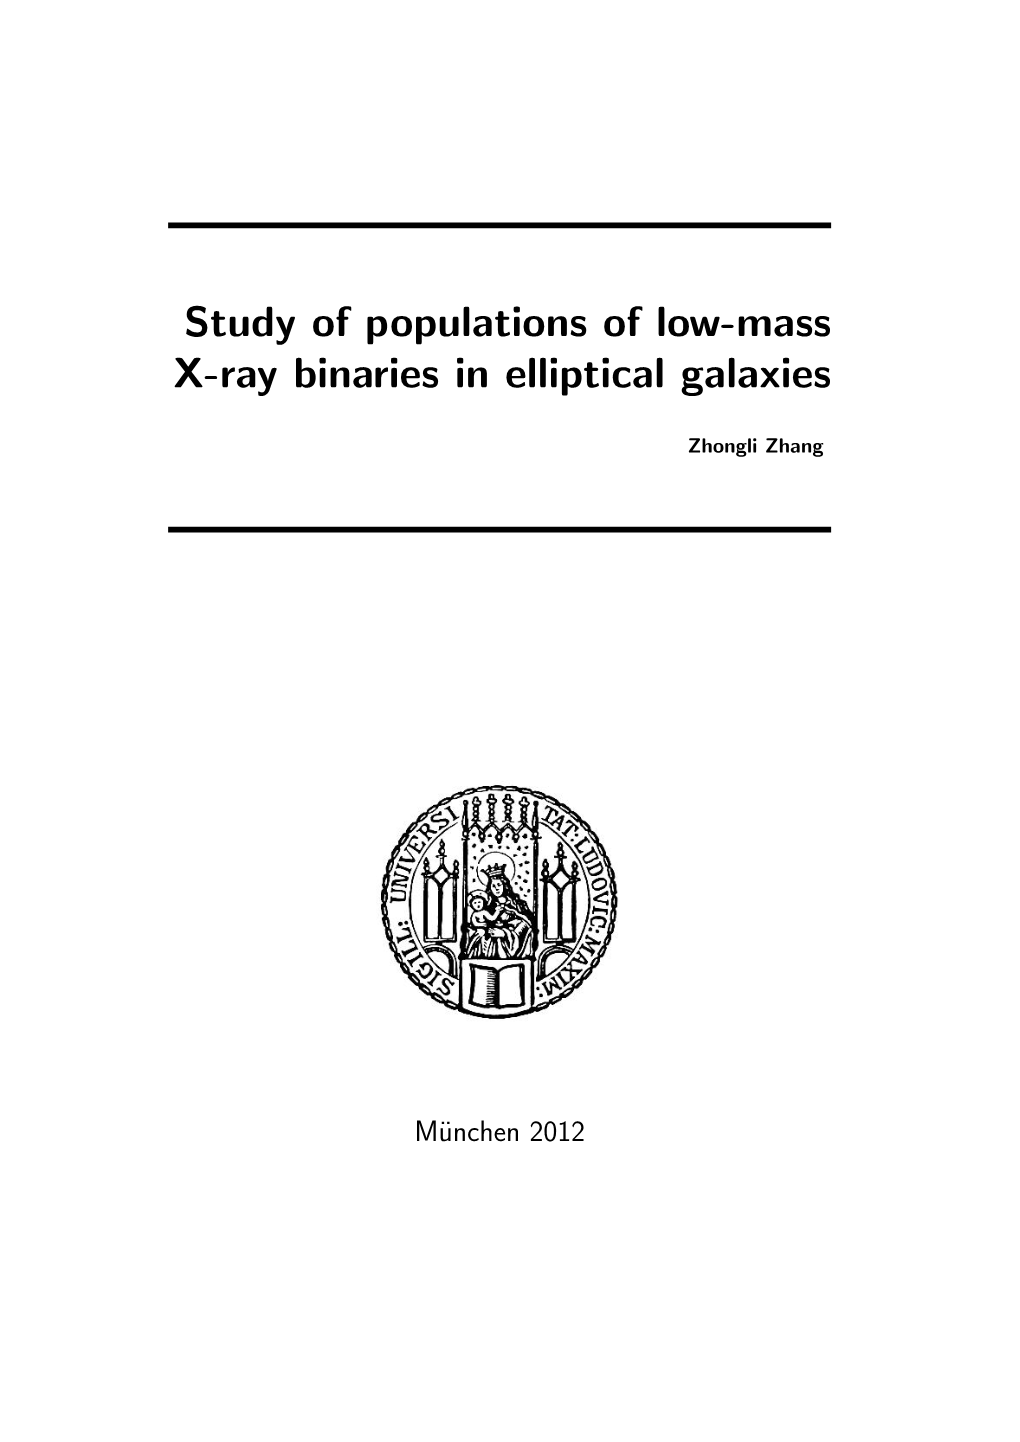 Study of Populations of Low-Mass X-Ray Binaries in Elliptical Galaxies